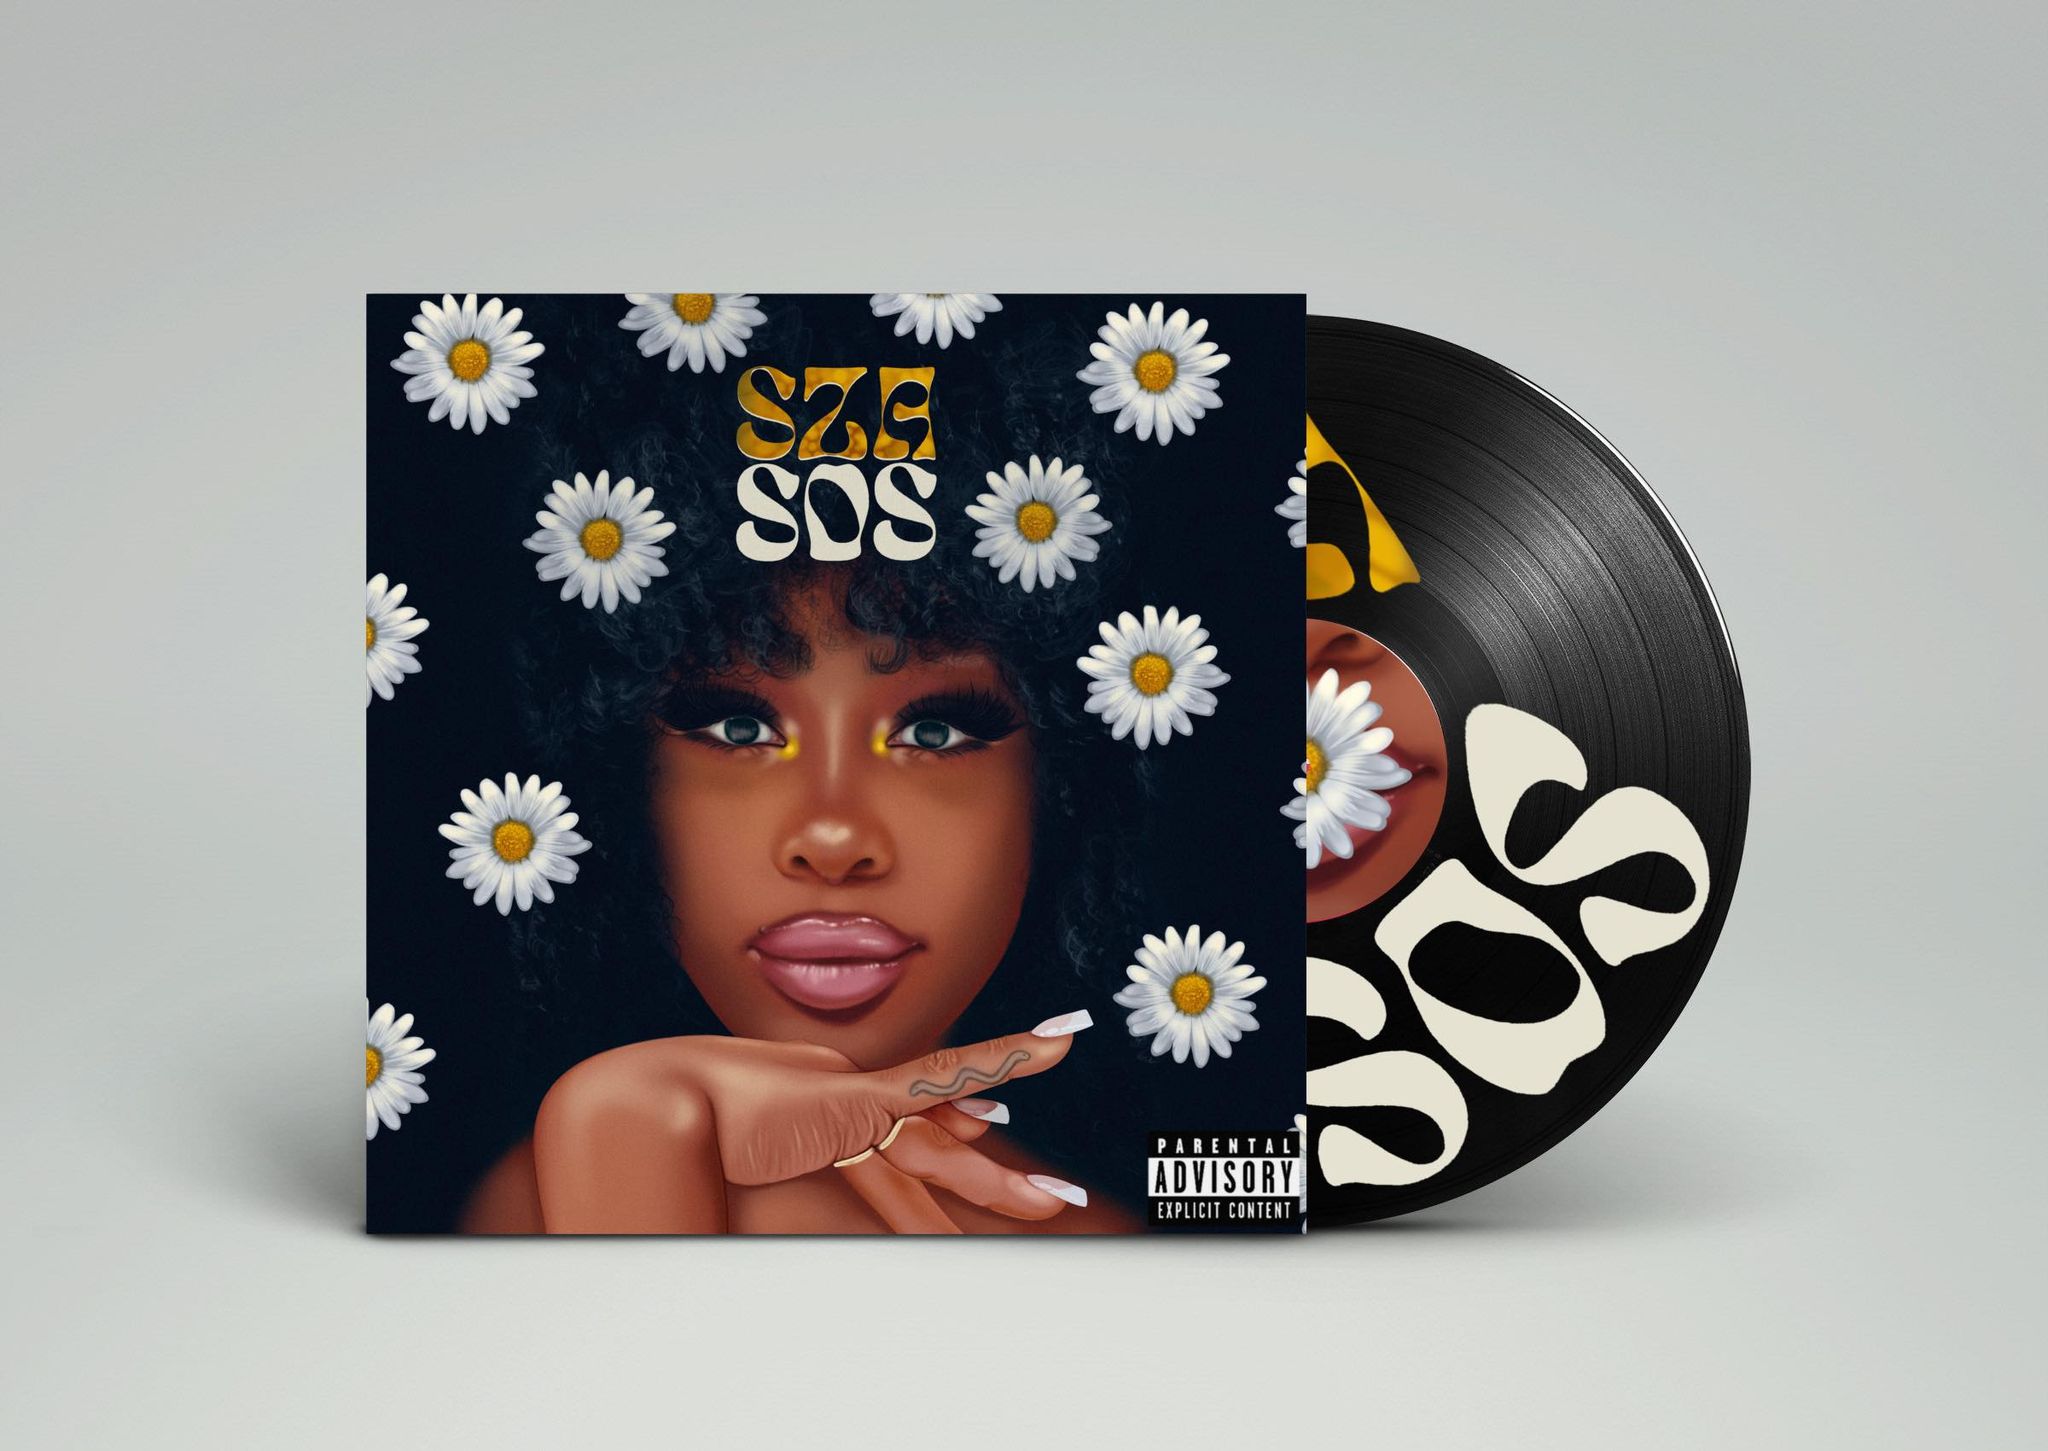 A Record Vinyl design by Sofie Grint. Portraying a close up portrait of the singer SZA with daises in her hair.